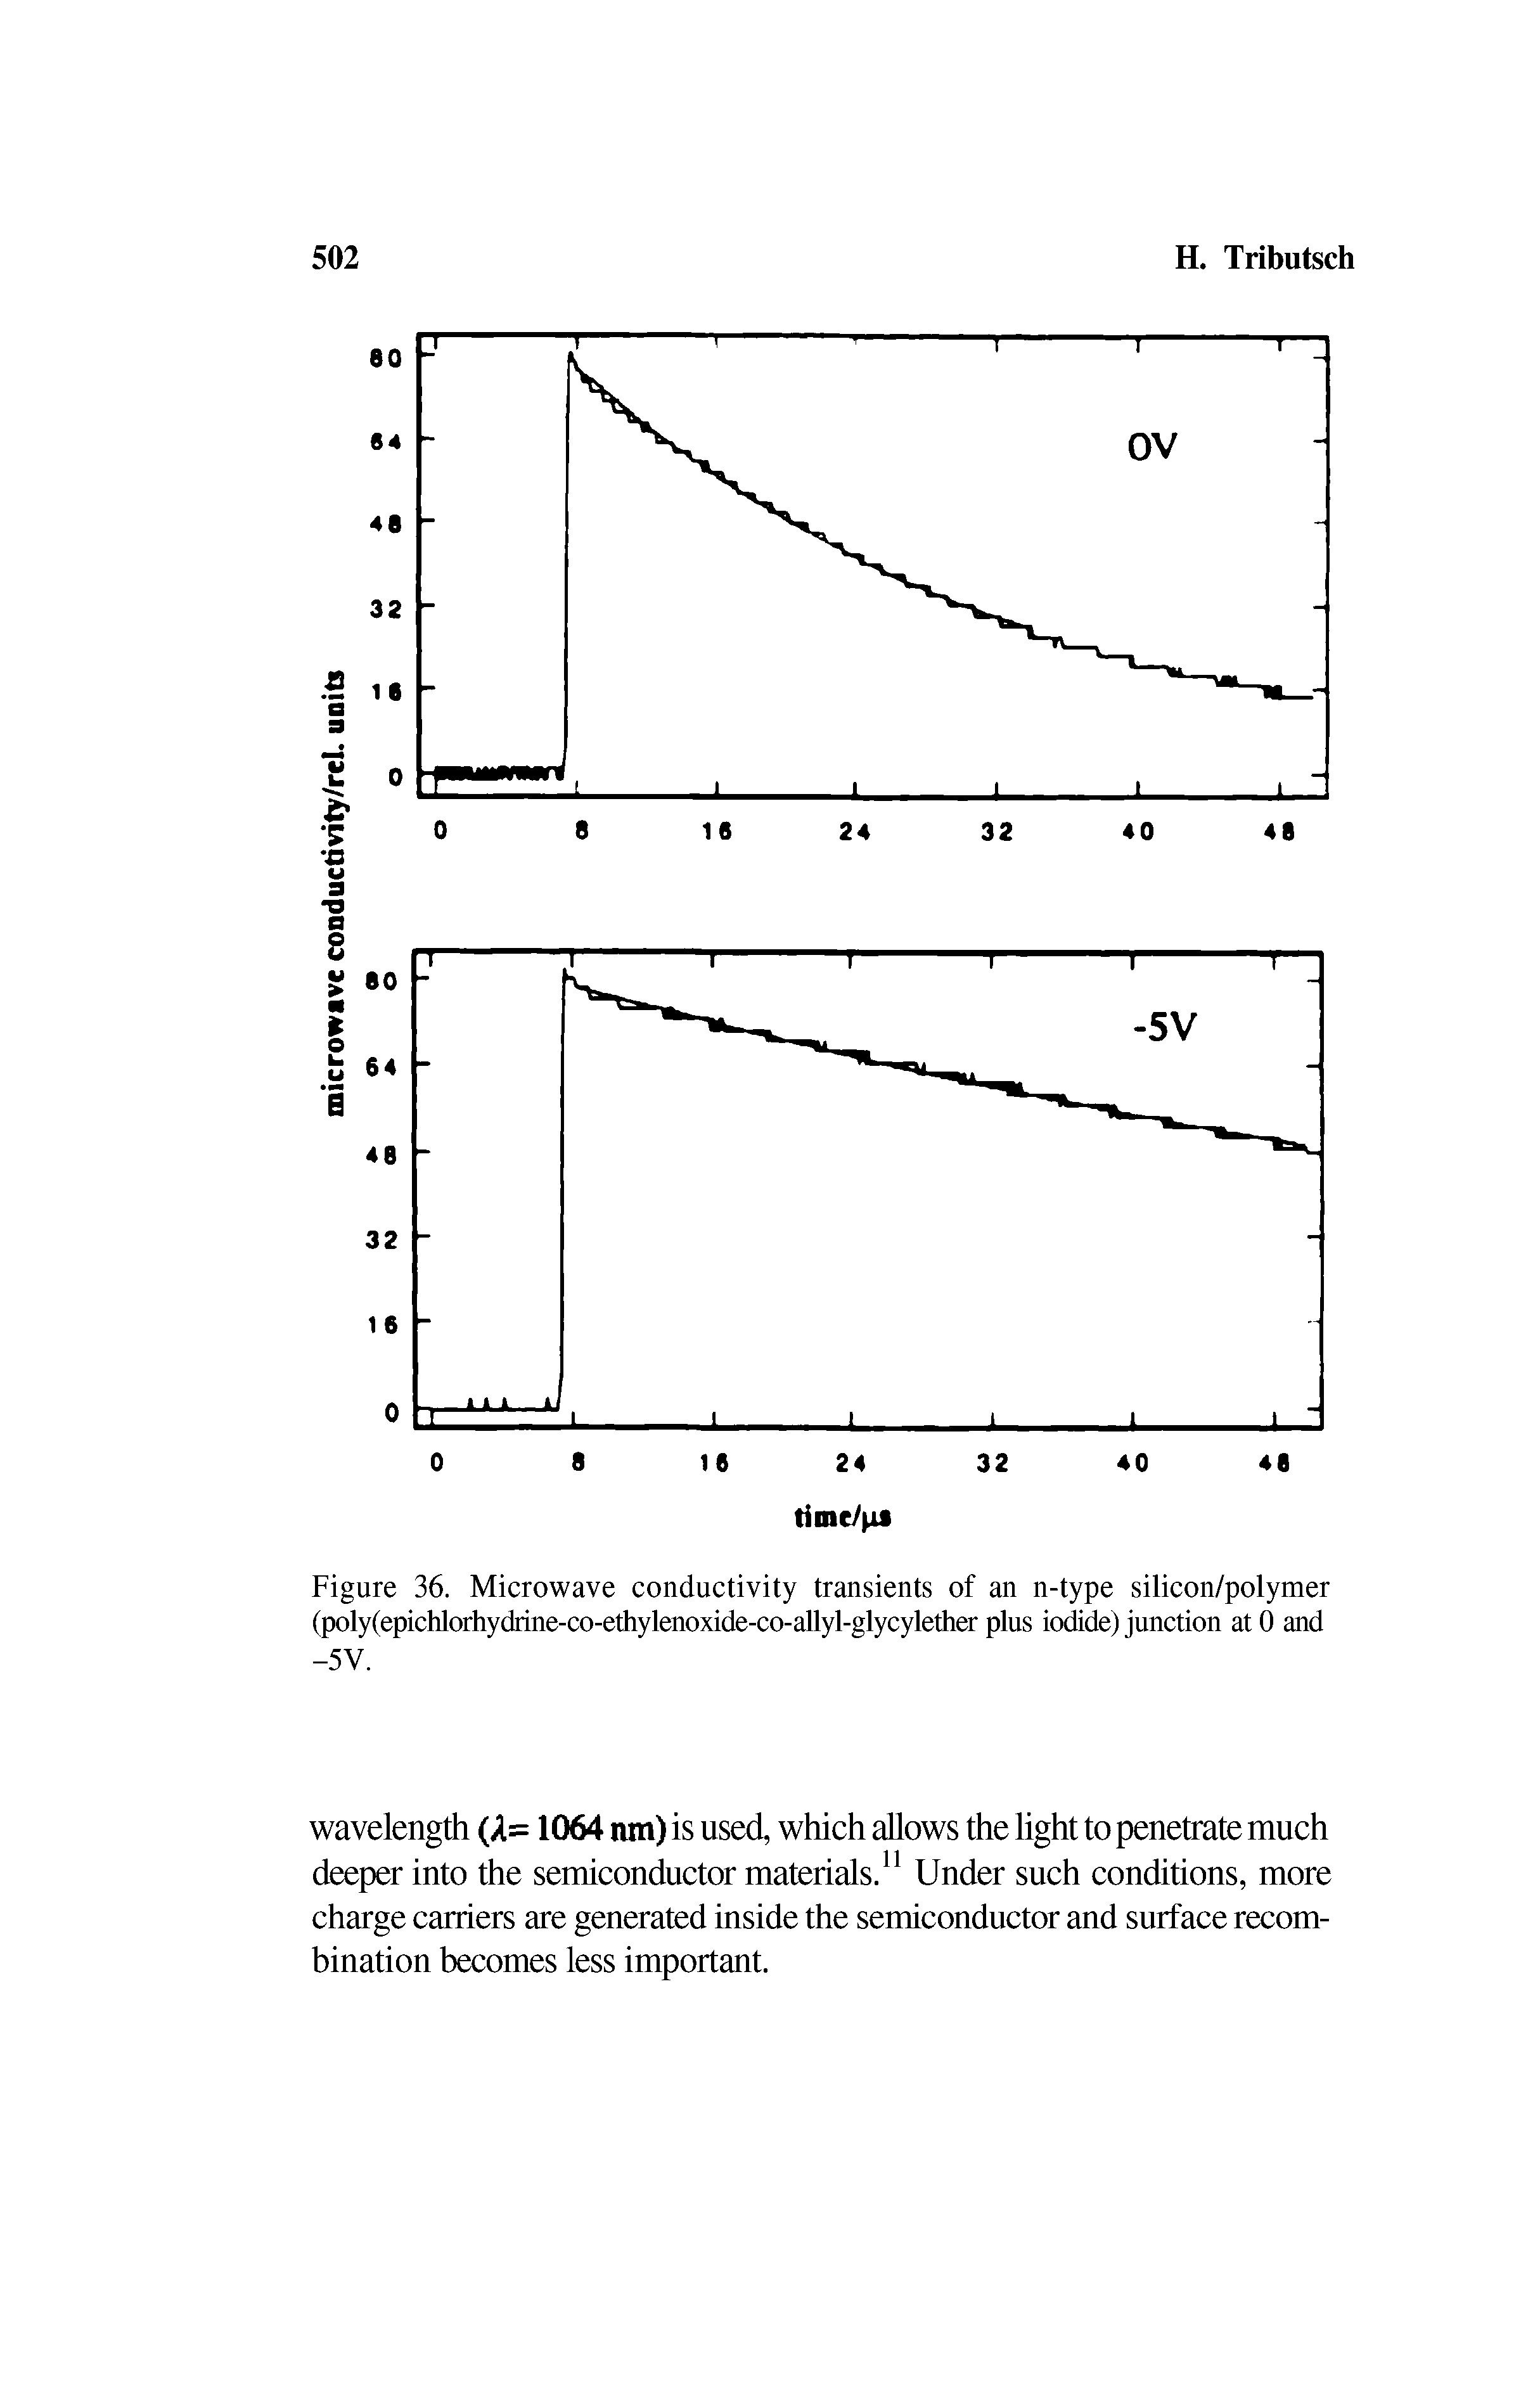 Figure 36. Microwave conductivity transients of an n-type silicon/polymer (poly(epichlorhydrine-co-ethylenoxide-co-allyl-glycylether plus iodide) junction at 0 and -5V.